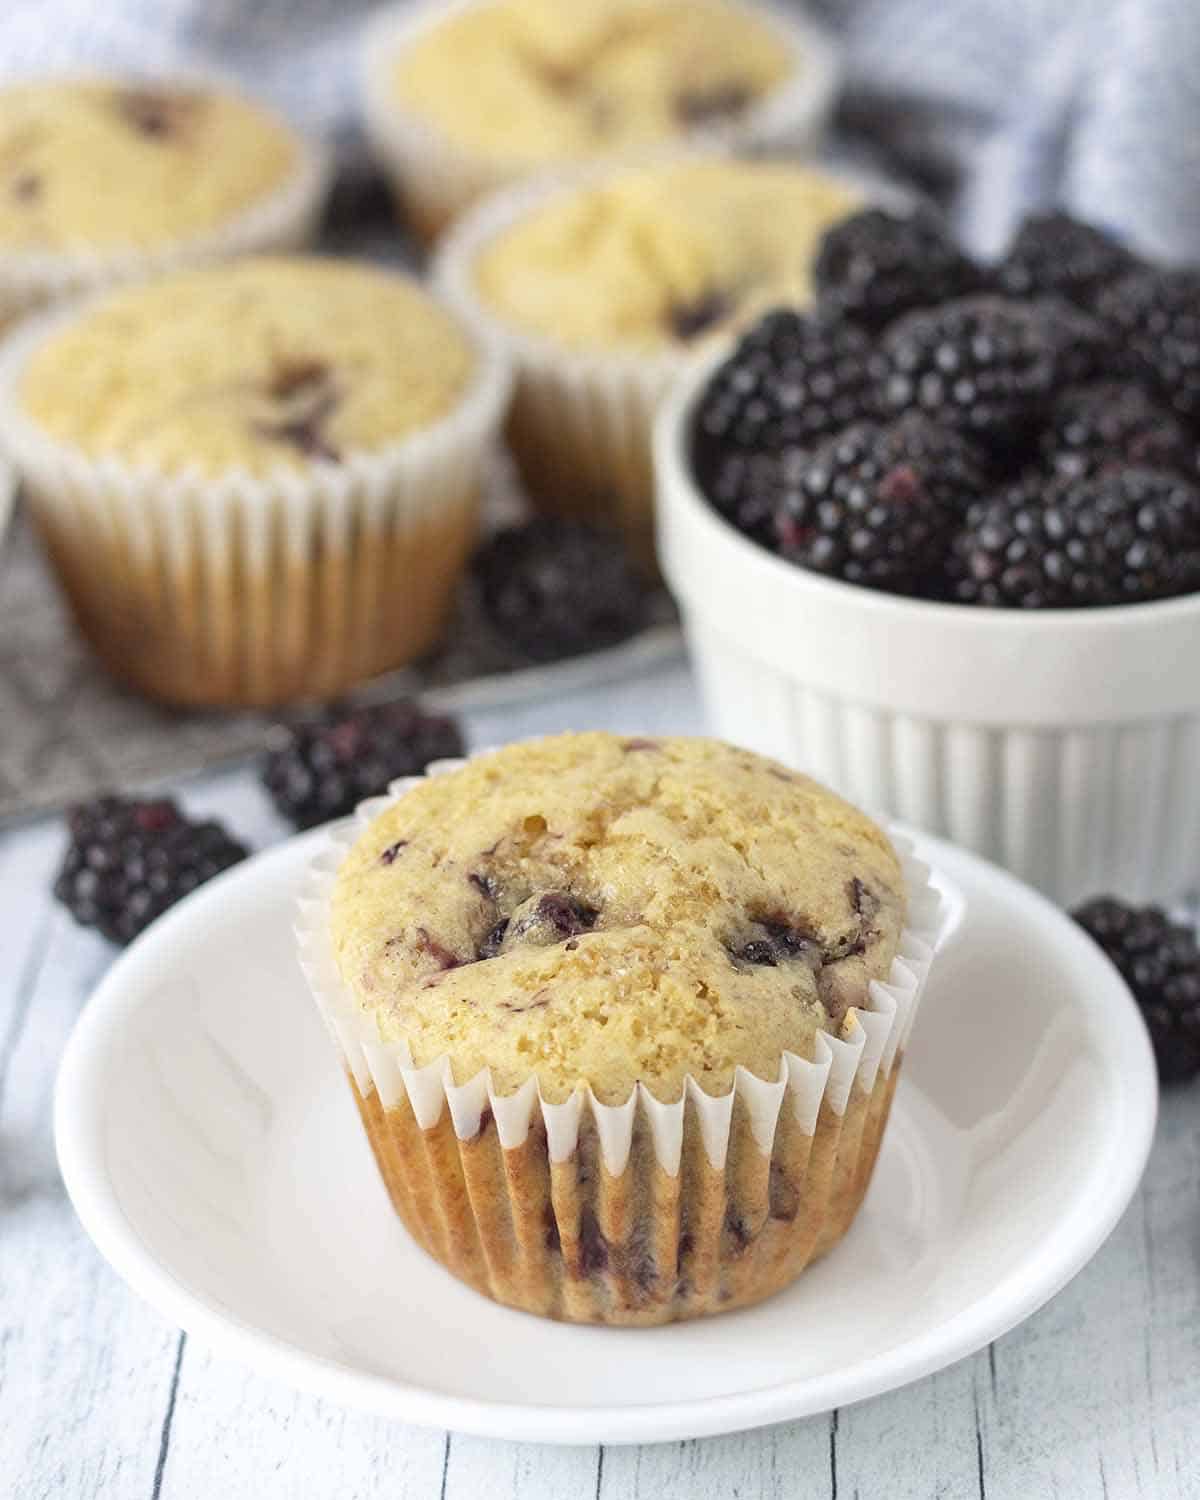 A gluten-free blackberry muffin on a small white plate.